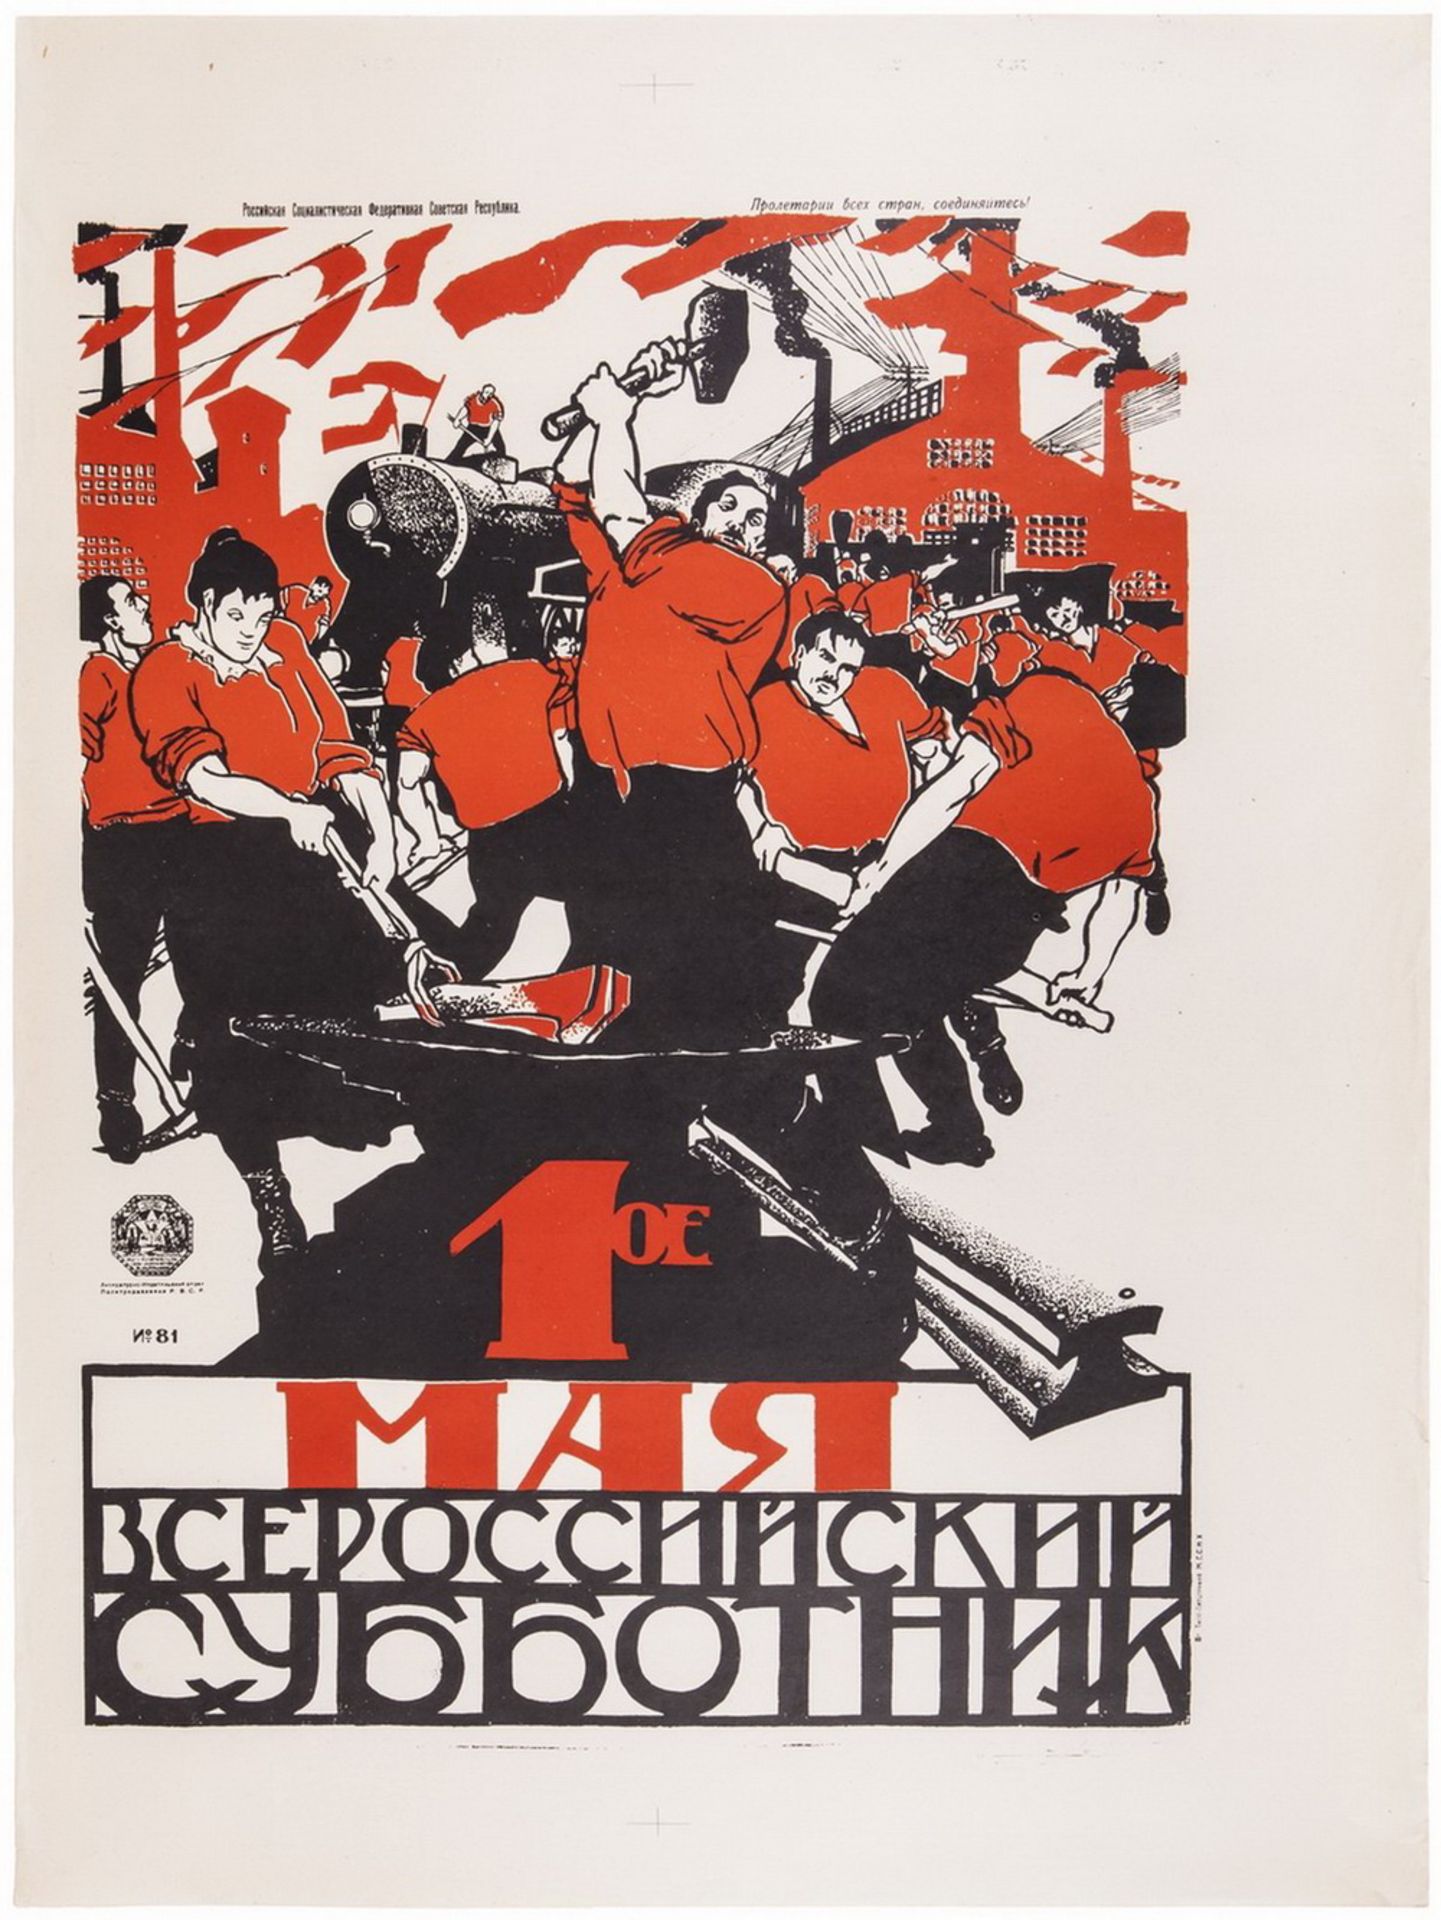 [Soviet art]. Poster "May 1st. All-russian voluntary Saturday work". - Moscow, [1920]. 68,5x51,5 cm.